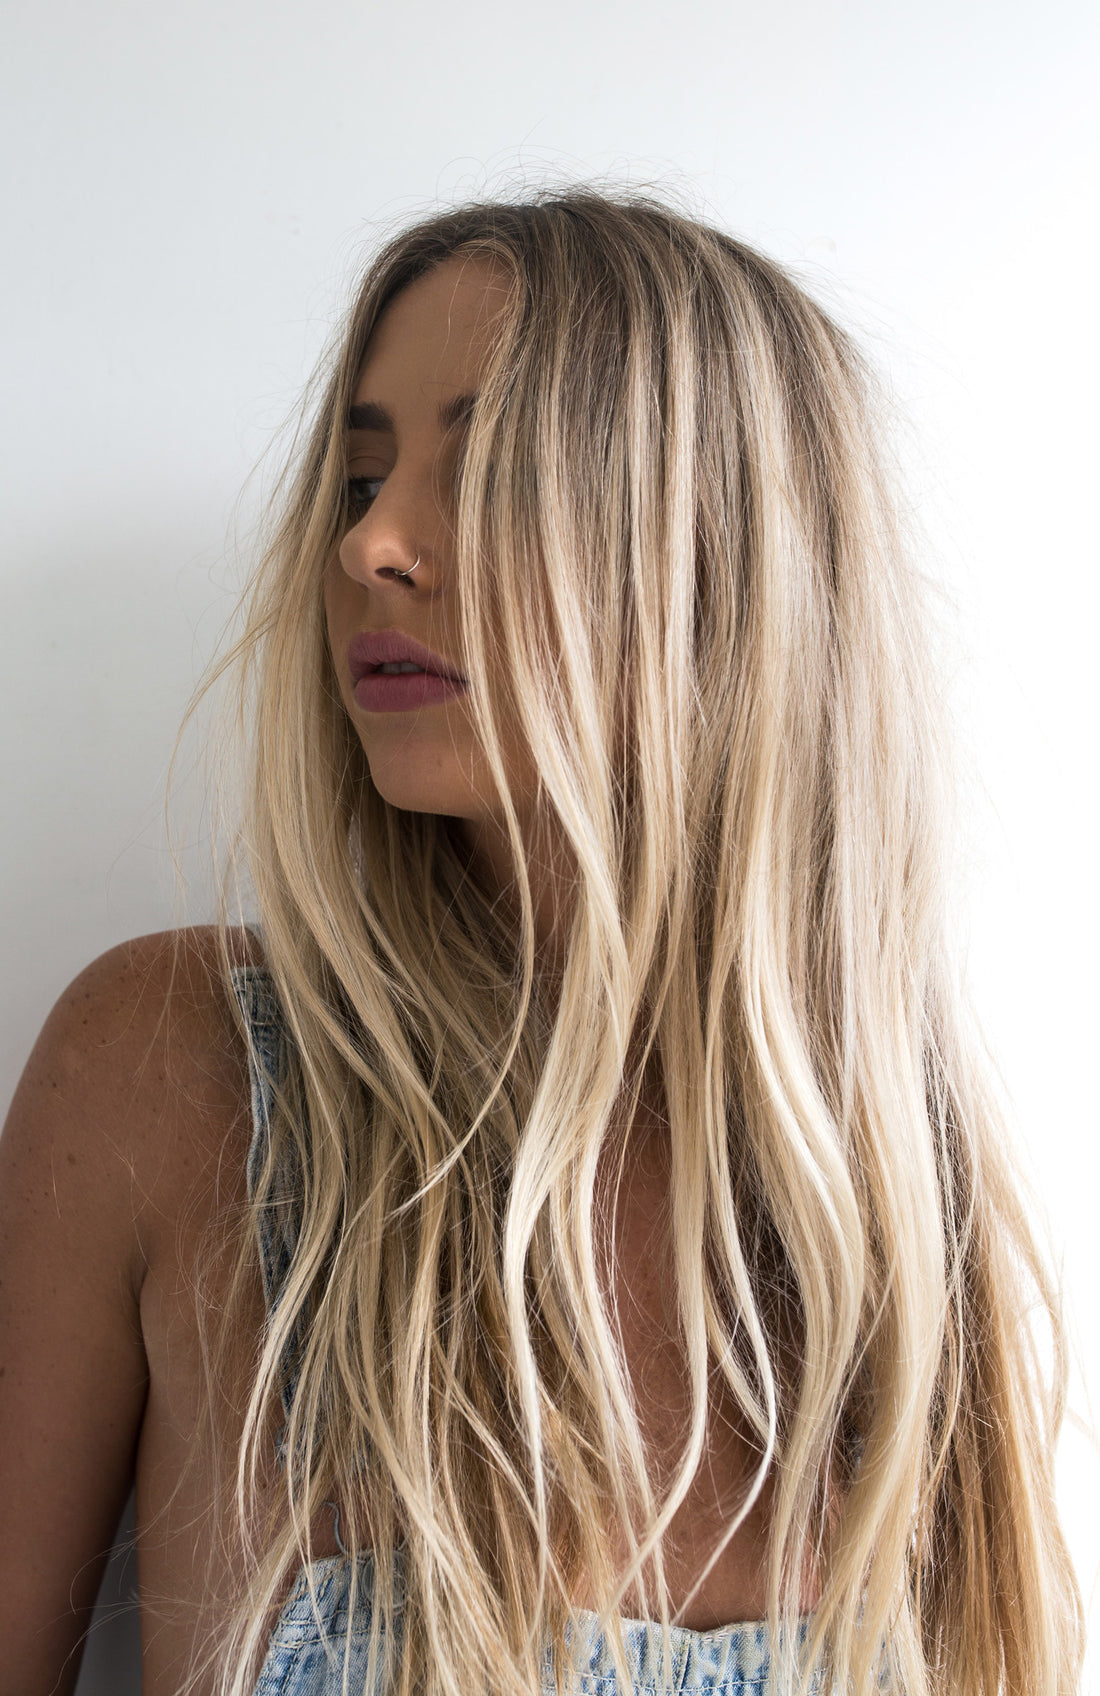 Go Blonde and Stay Blonde – Tips for Home Hair Care